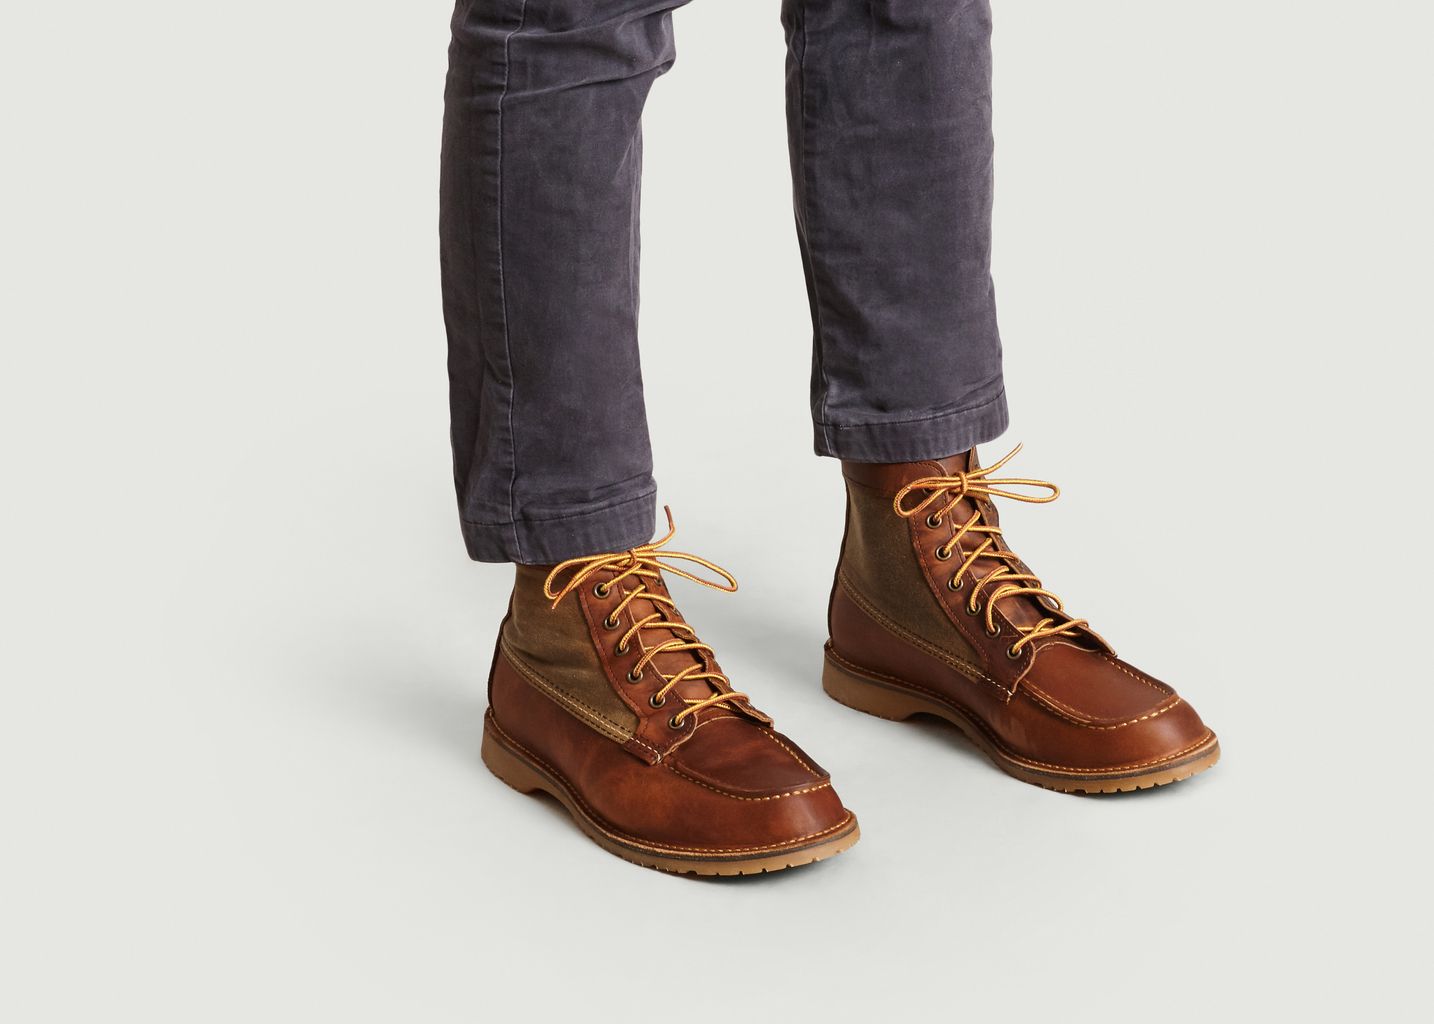 Wacouta Chukka Boots - Red Wing Shoes